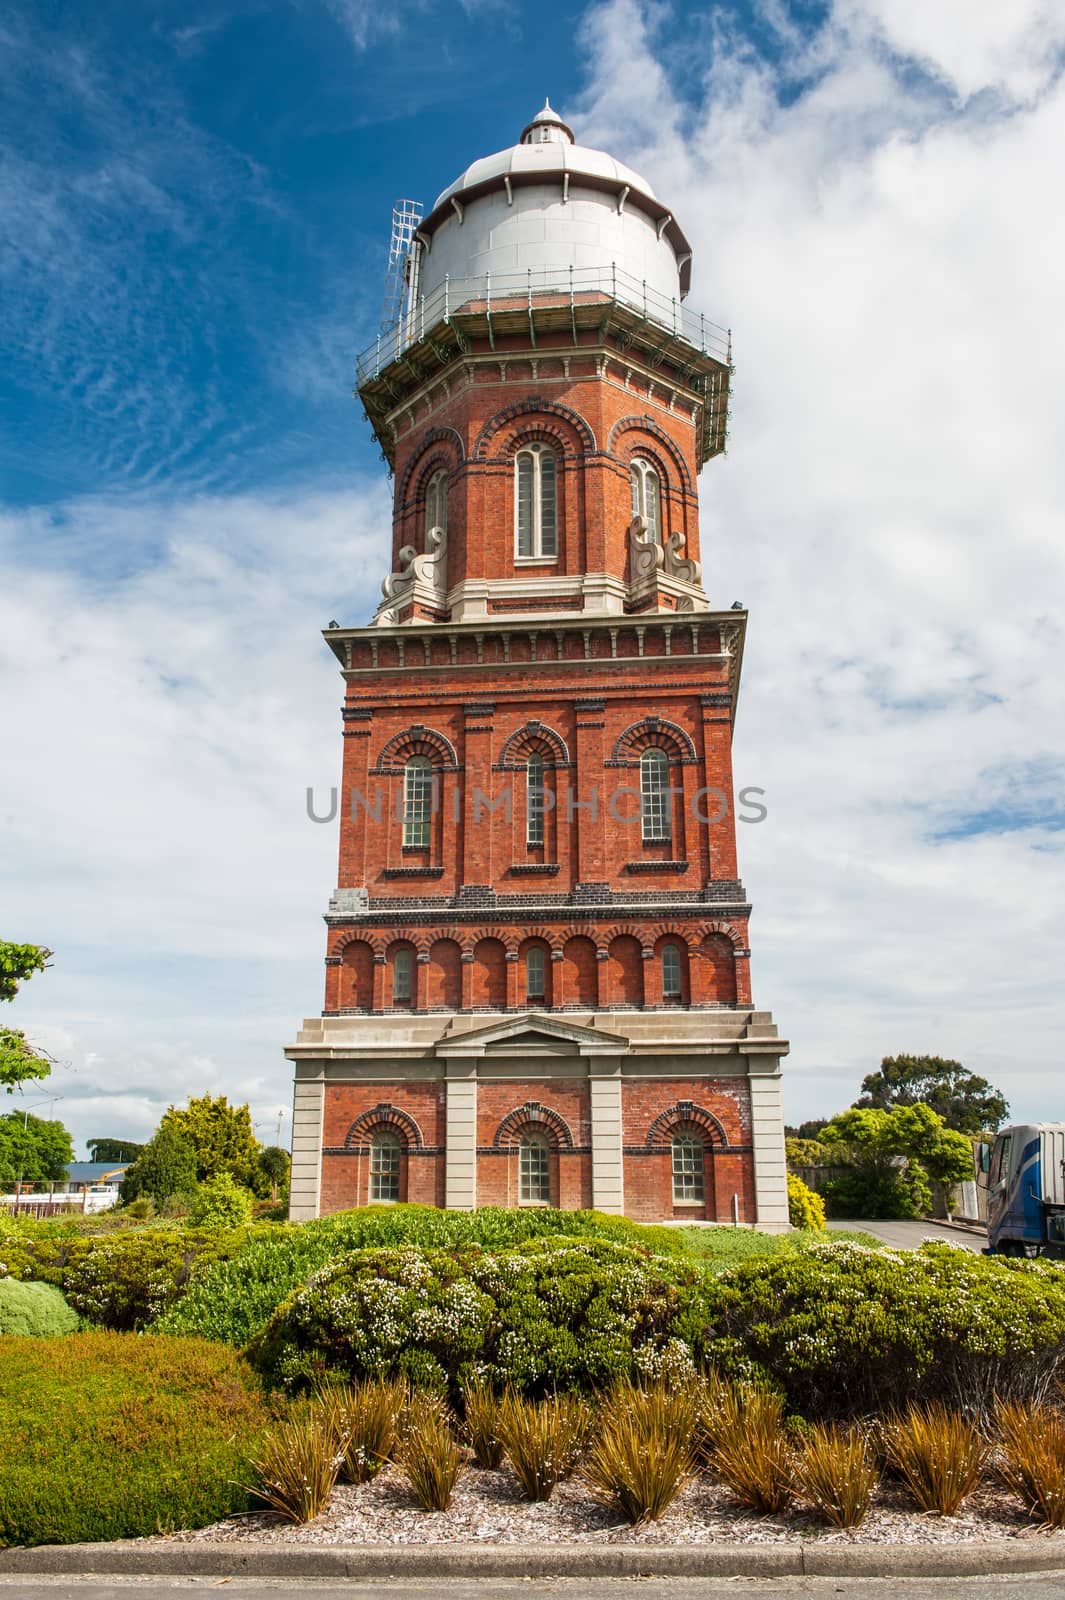 Invercargill Water Tower by fyletto